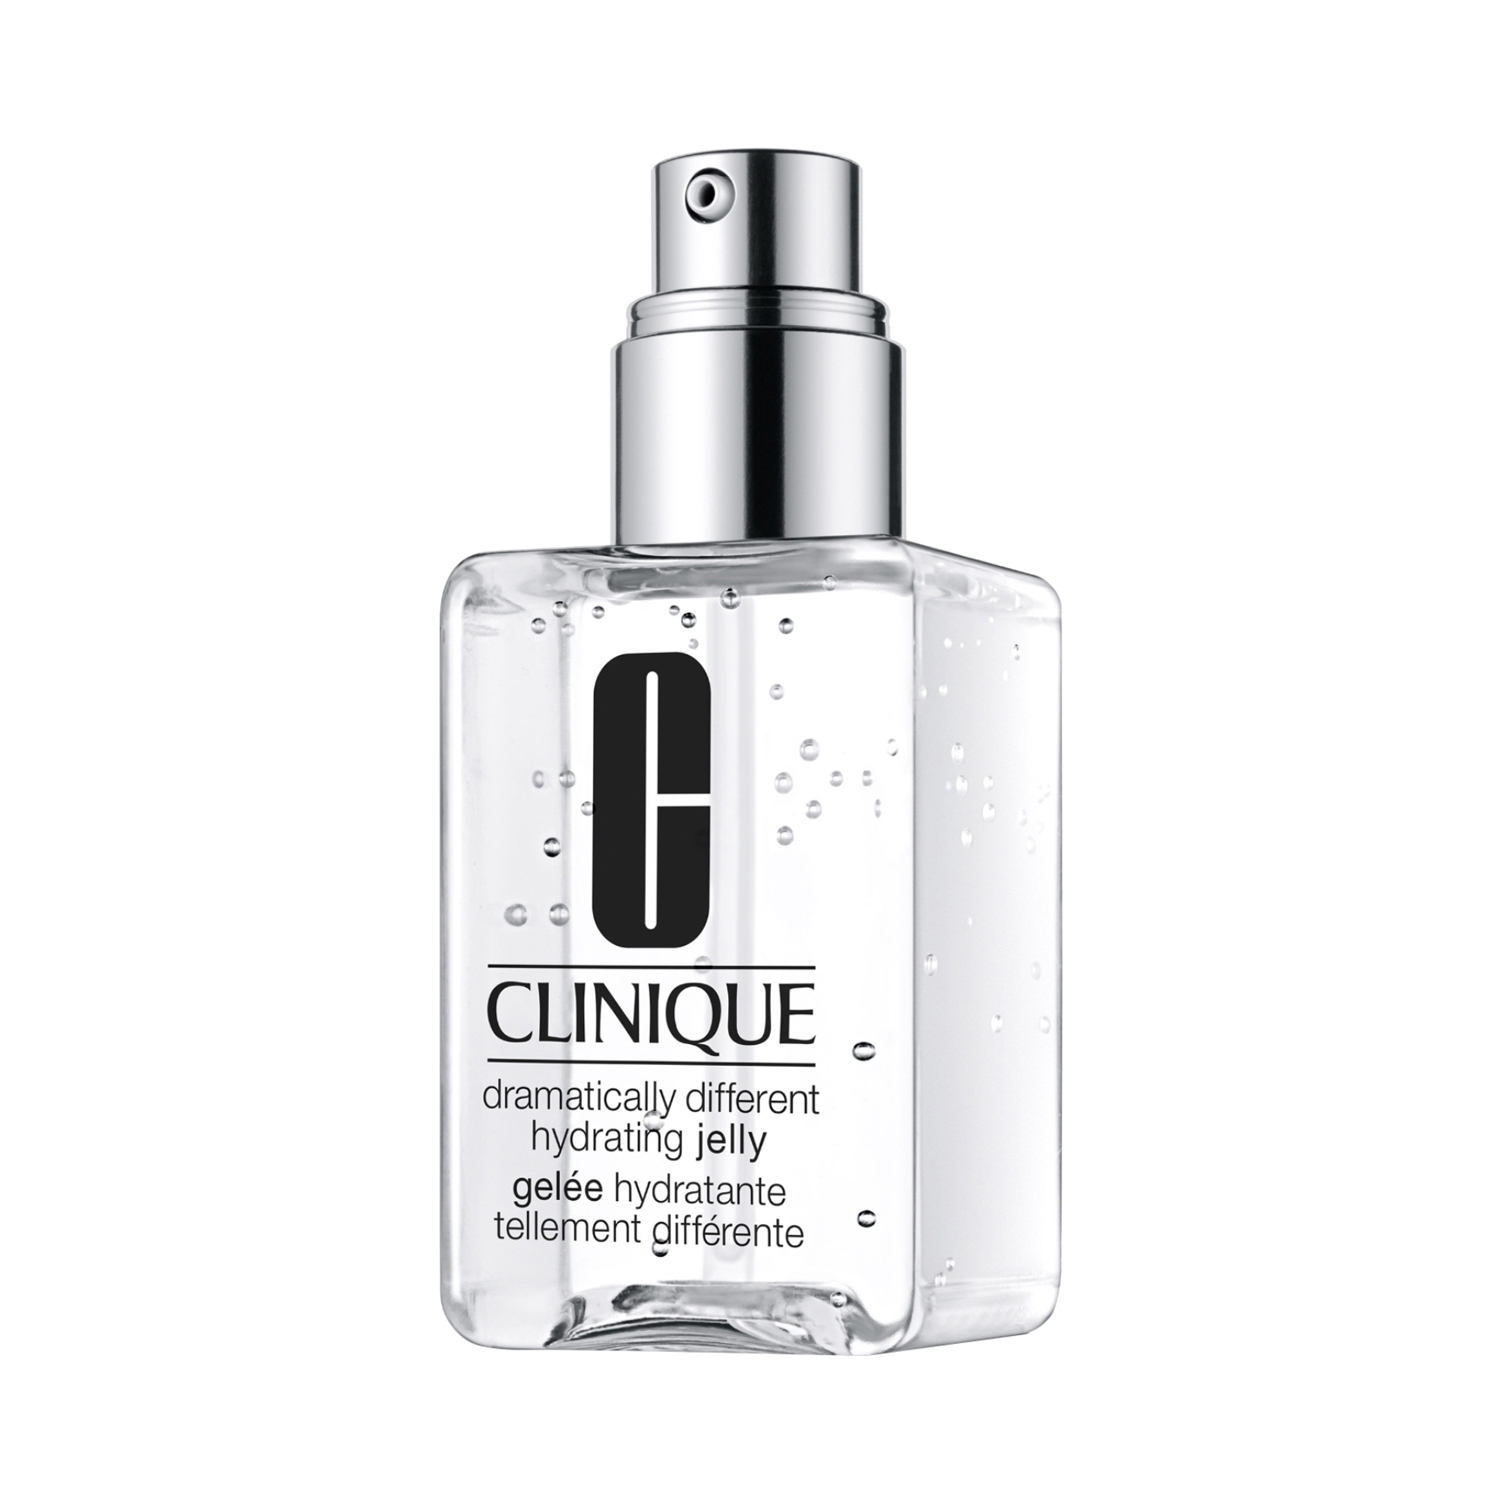 CLINIQUE | CLINIQUE Dramatically Different Hydrating Jelly (125ml)